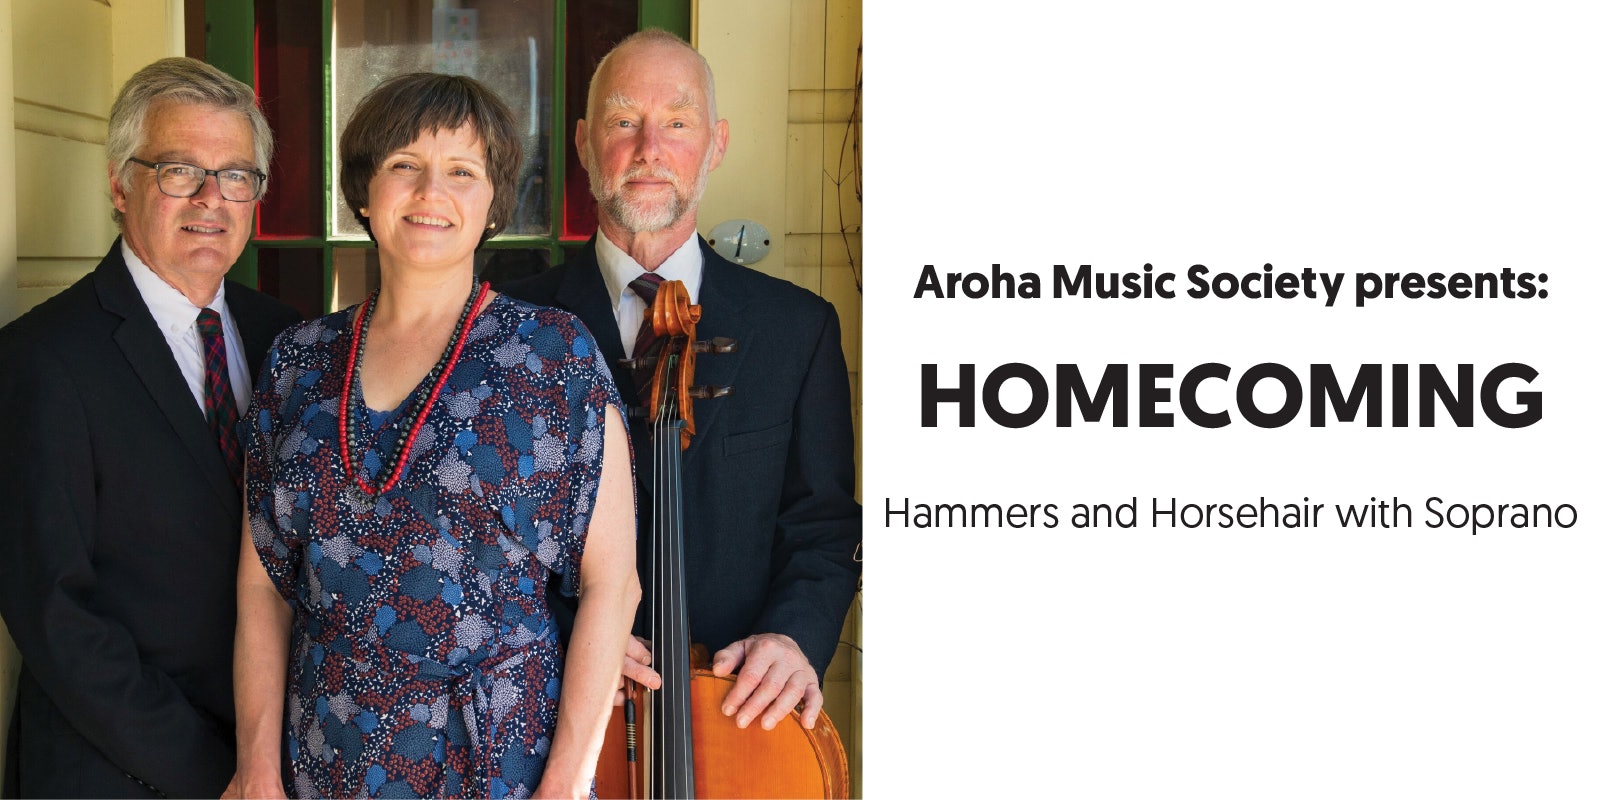 Homecoming - Hammers and Horsehair with Soprano